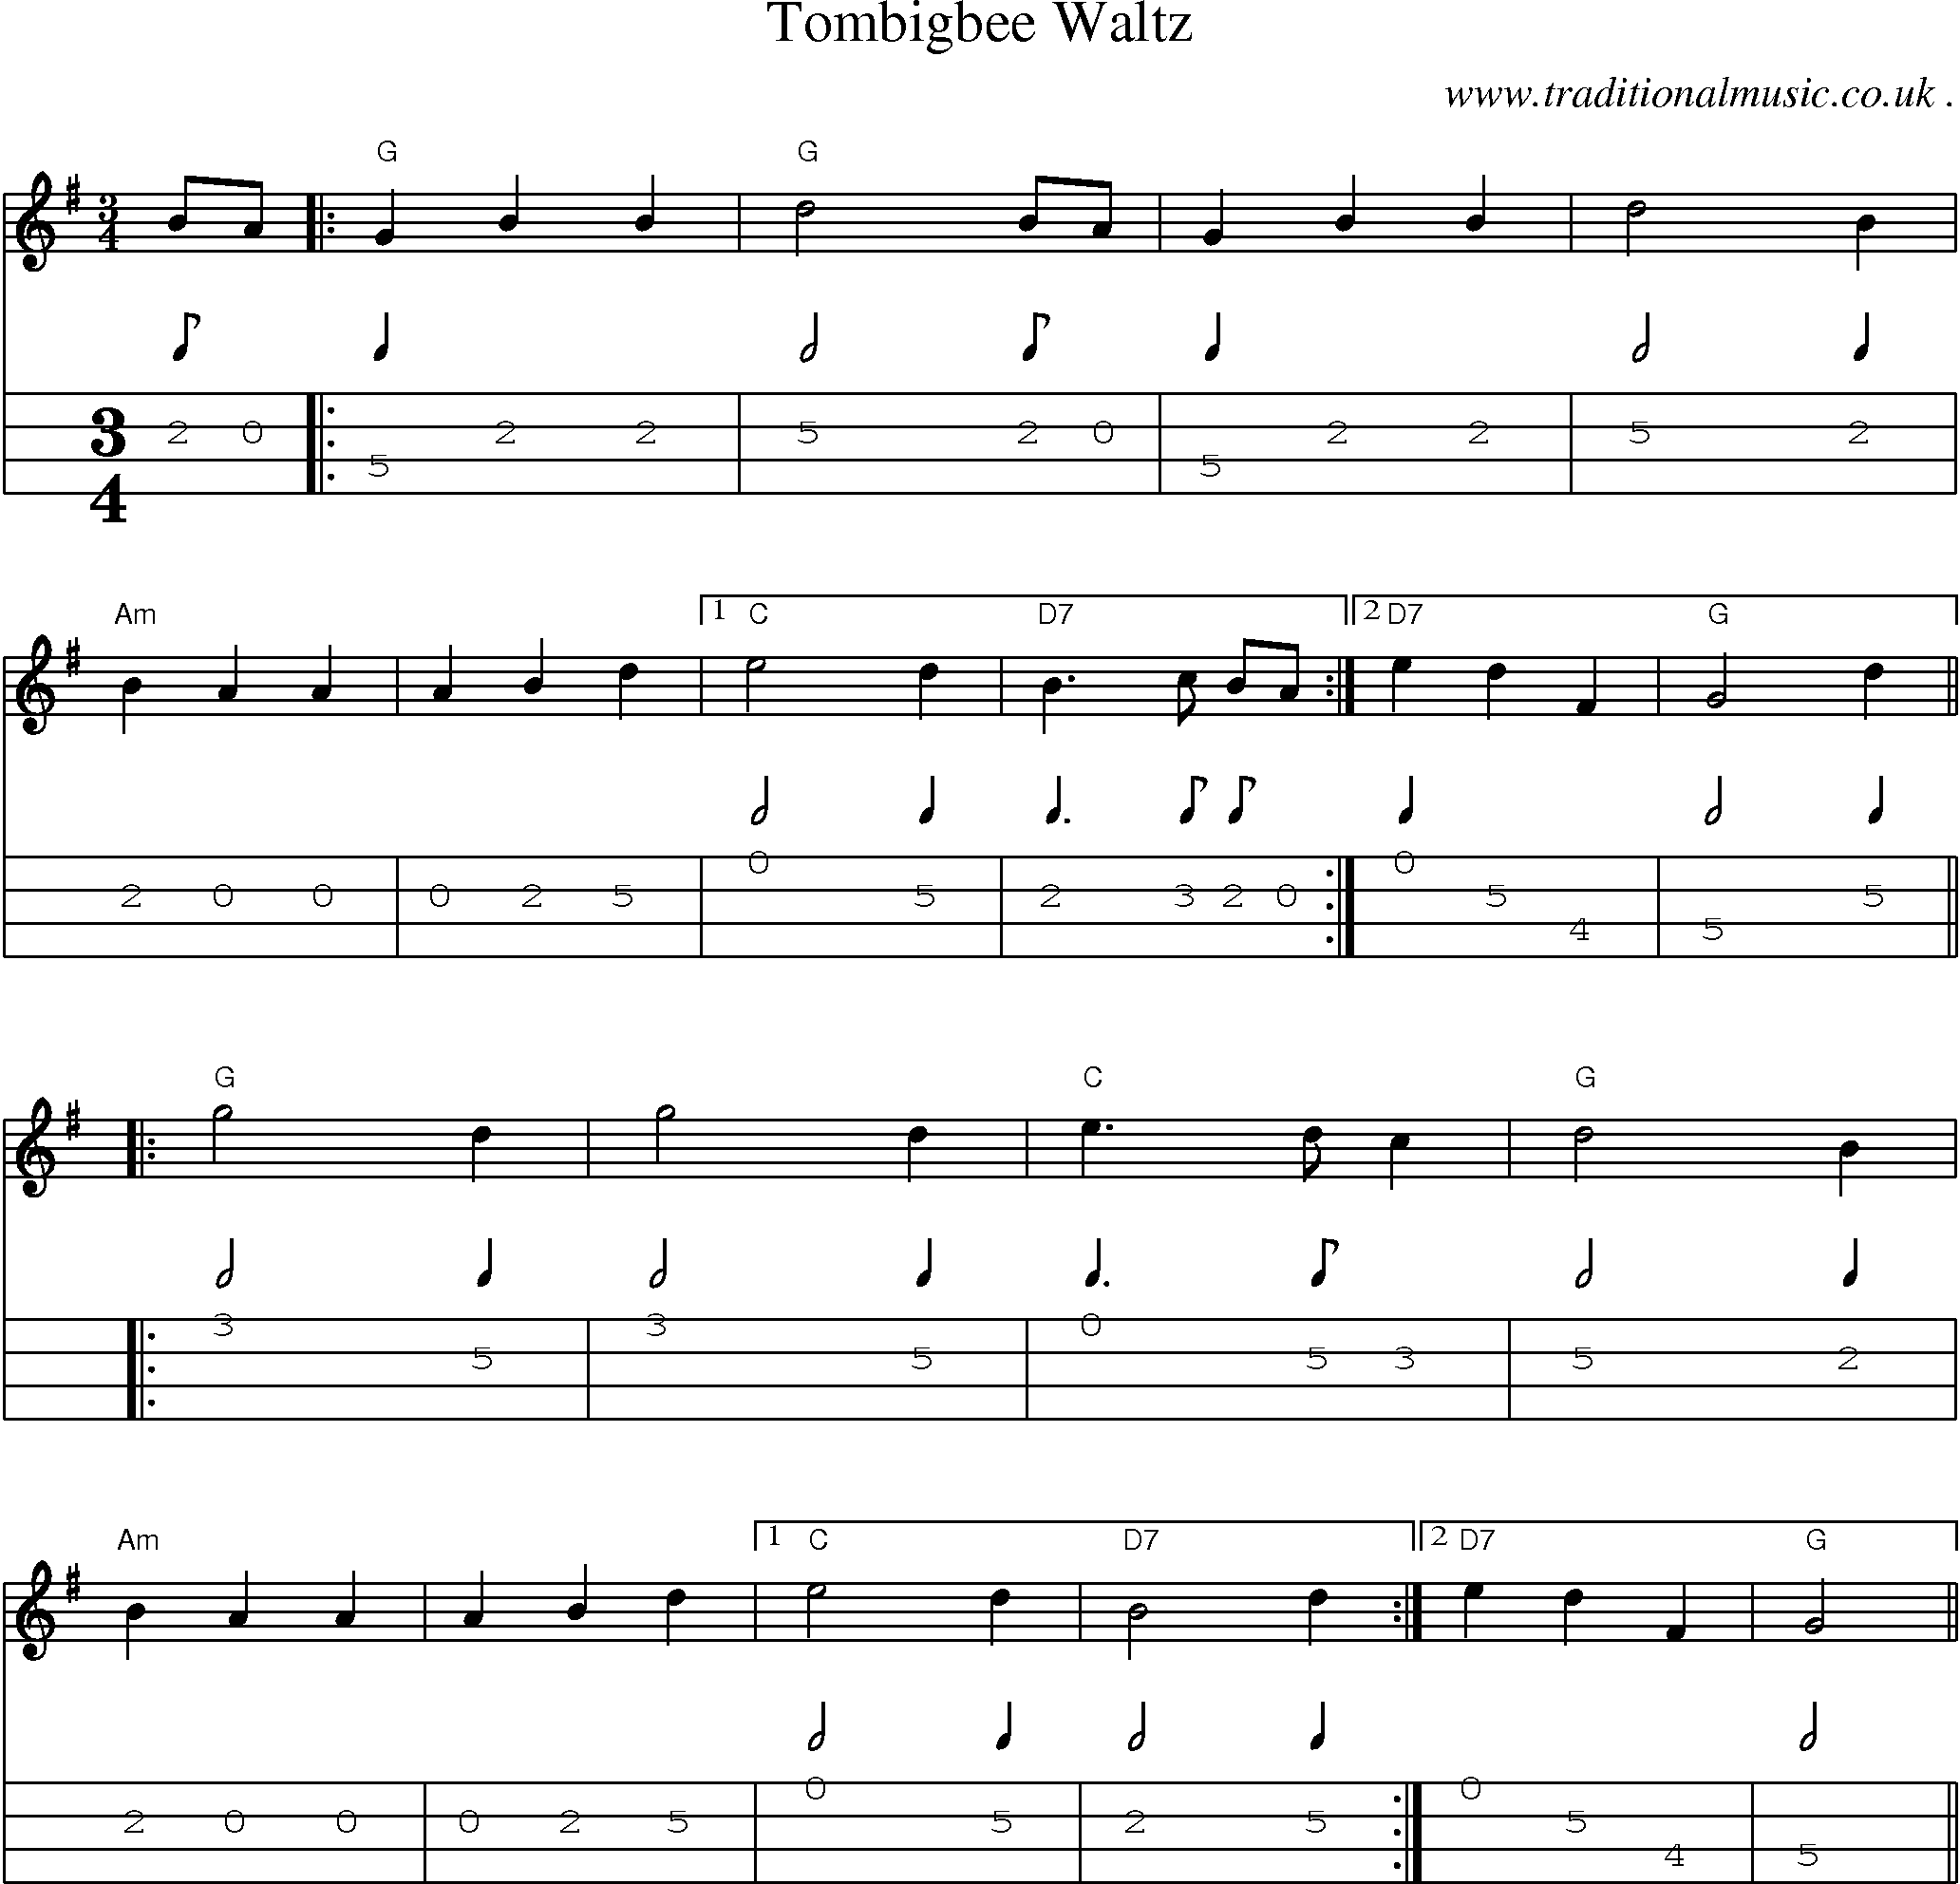 Music Score and Guitar Tabs for Tombigbee Waltz